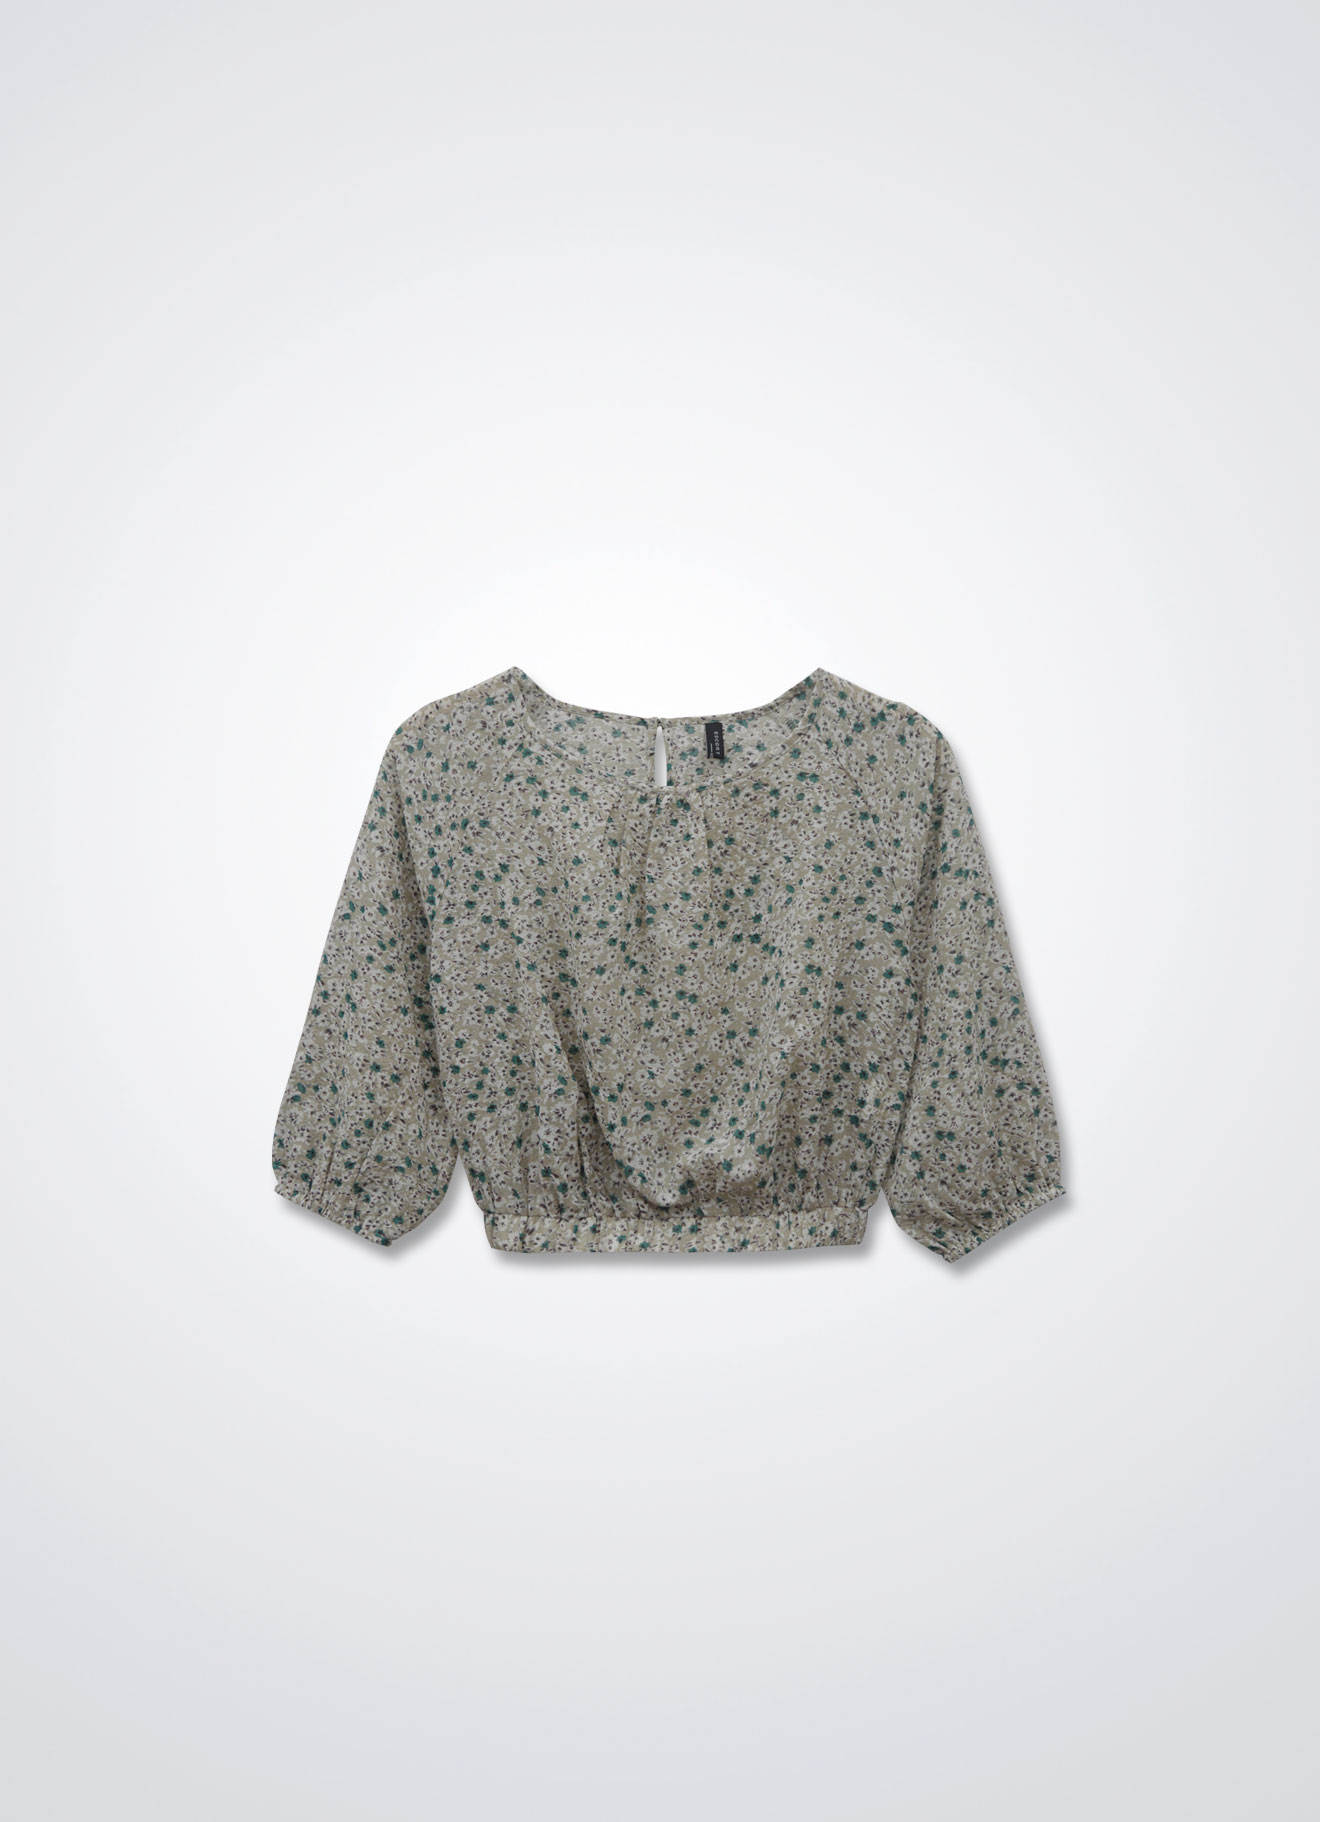 Latte' by Floral Printed Blouse